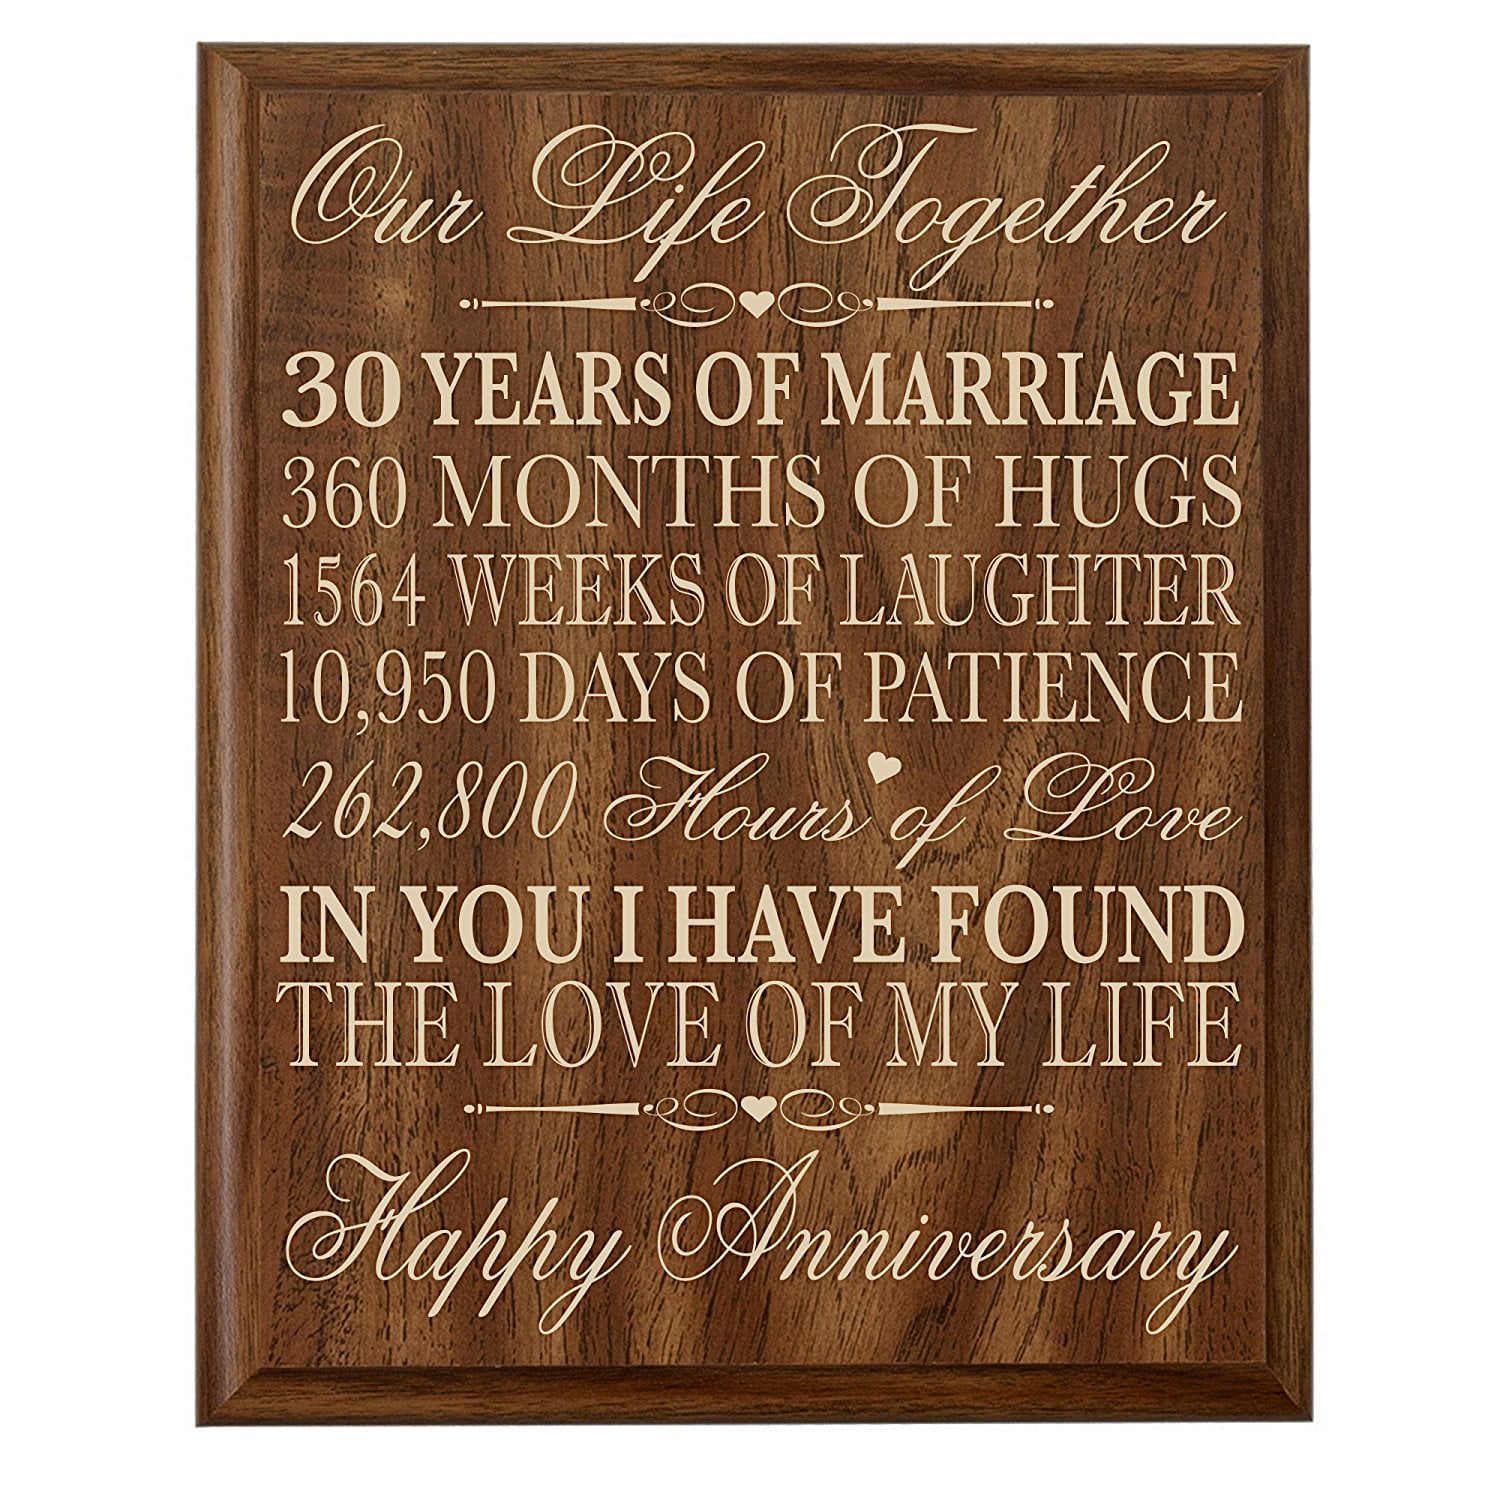 30 Year Wedding Anniversary Gifts
 30th Wedding Anniversary Wall Plaque Our Life To her